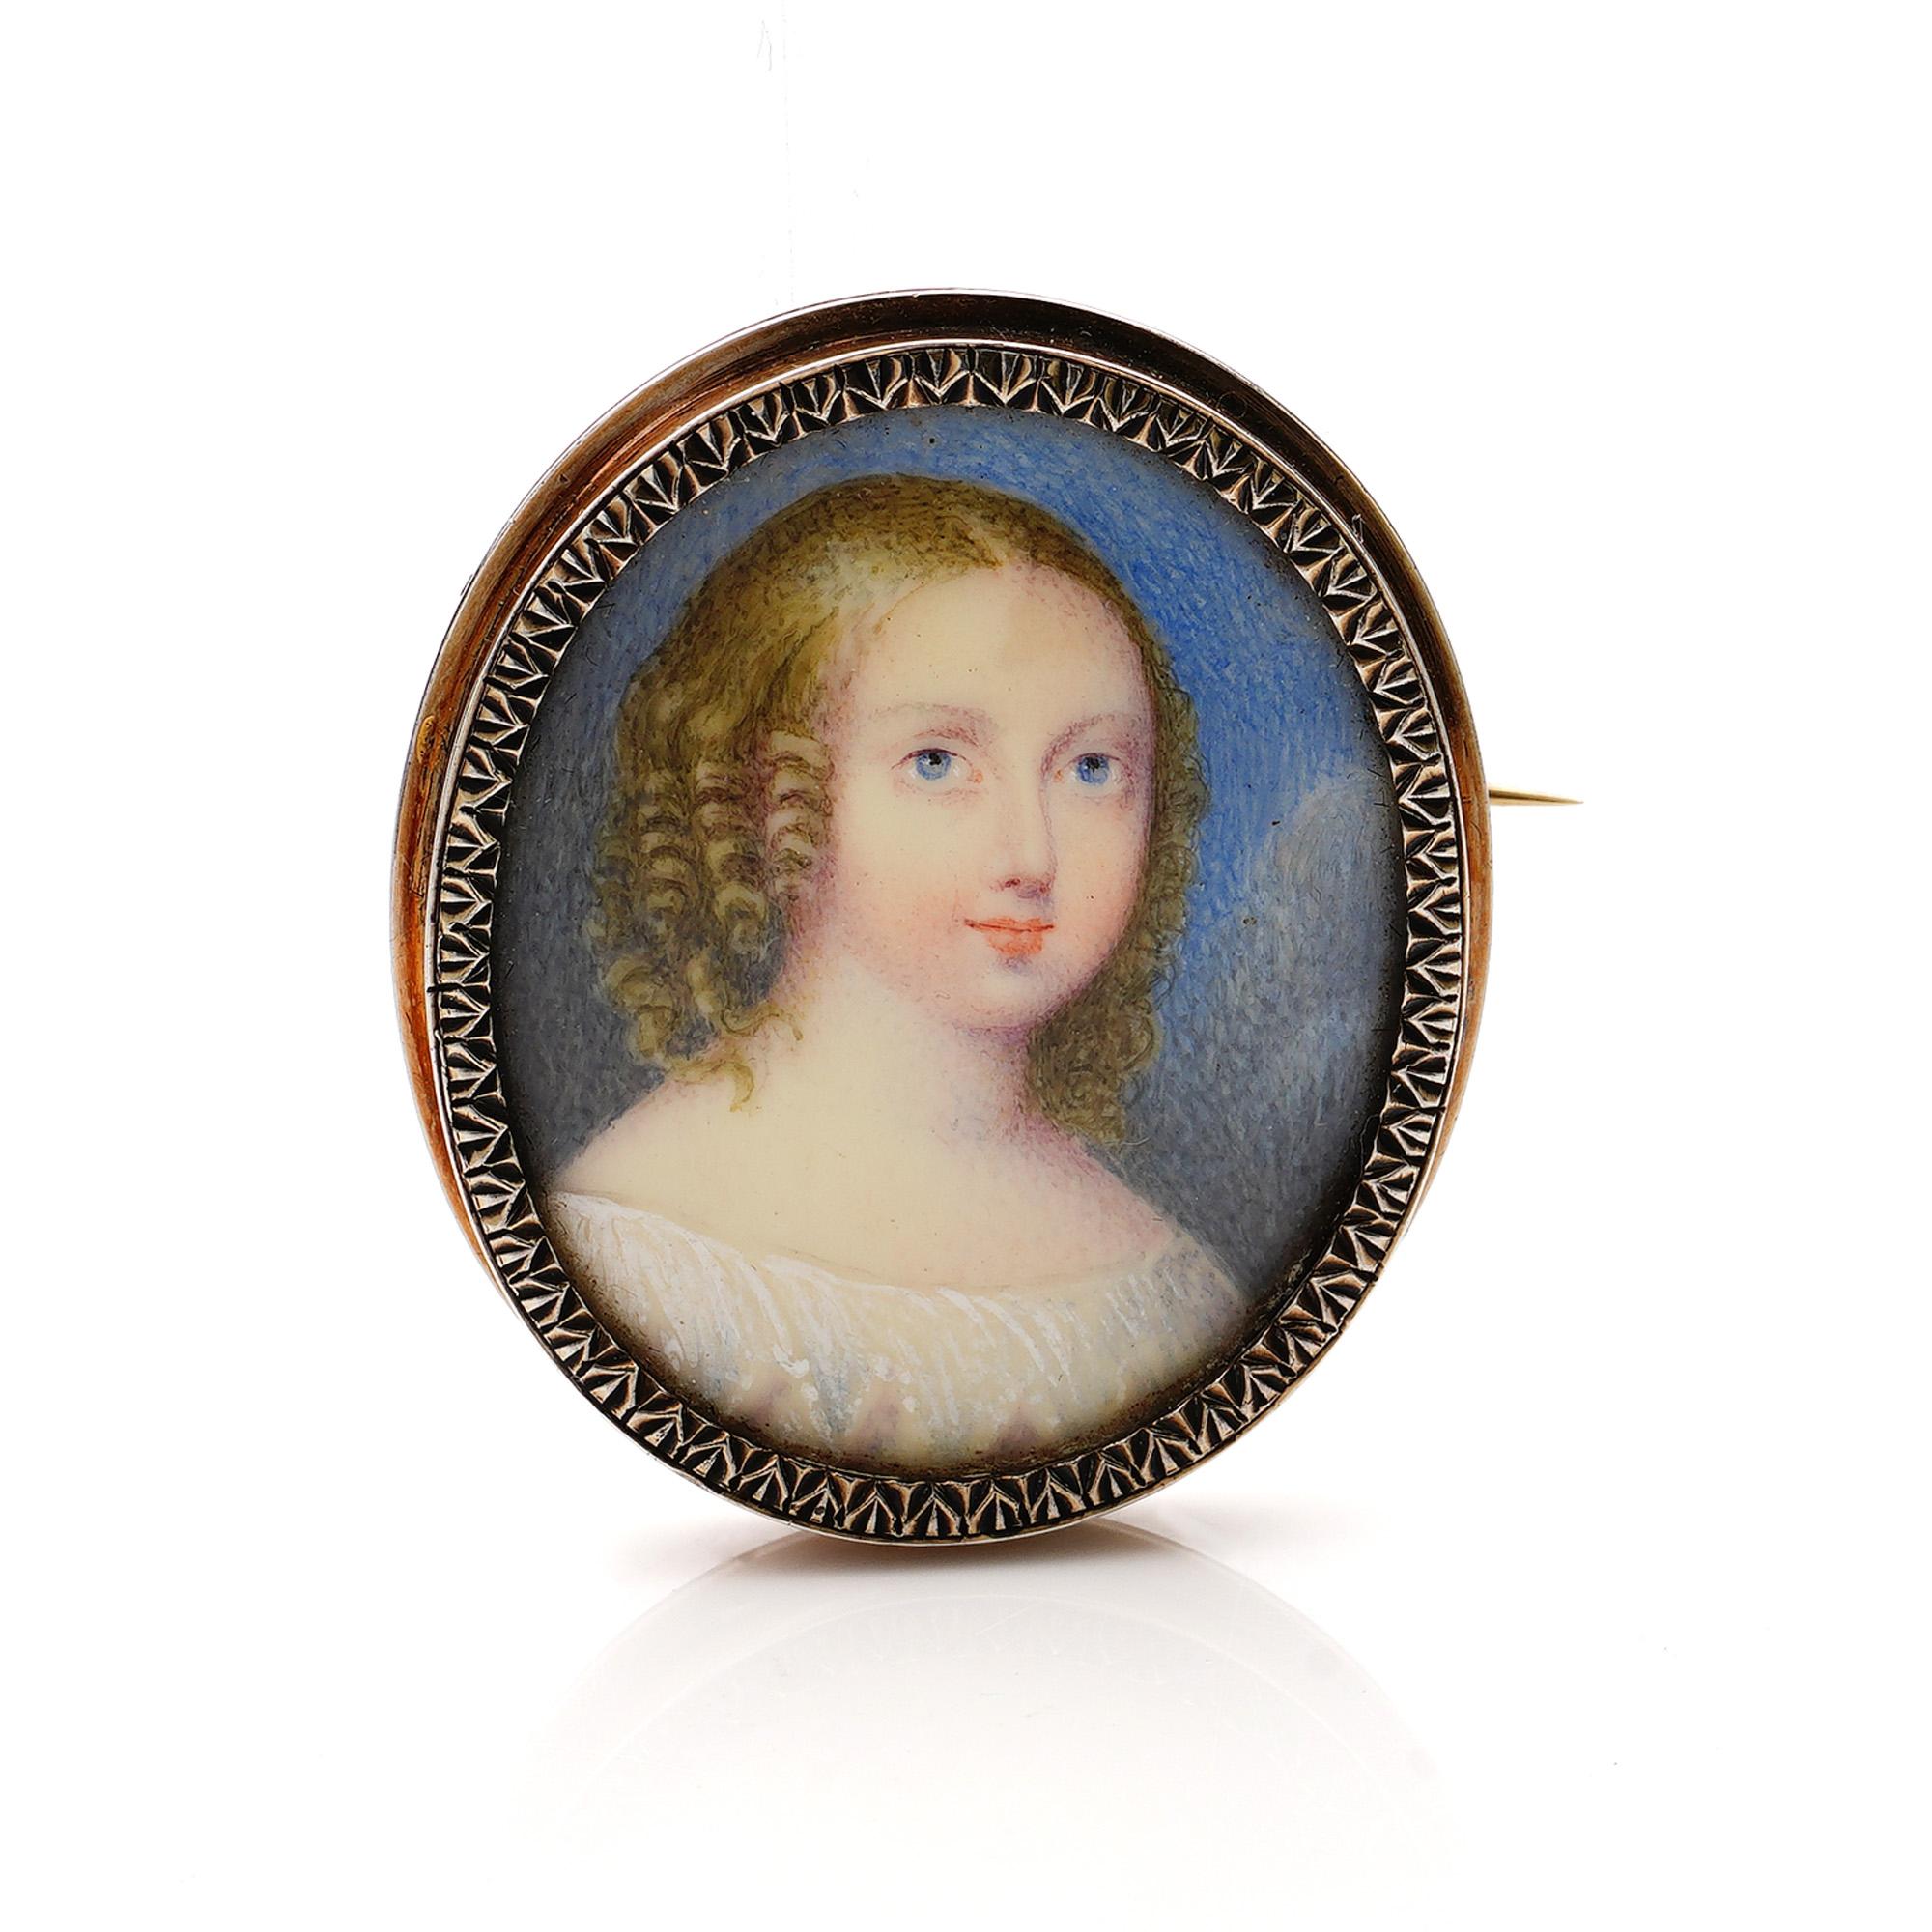 Antique French 19th century a young Princess Louise of France, later  Duchess of Berry hand-painted watercolour portrait miniature mounted in 950. silver.
Made in circa 1830. 
Hallmarked on the silver clasp with boar's head ( a French standard for